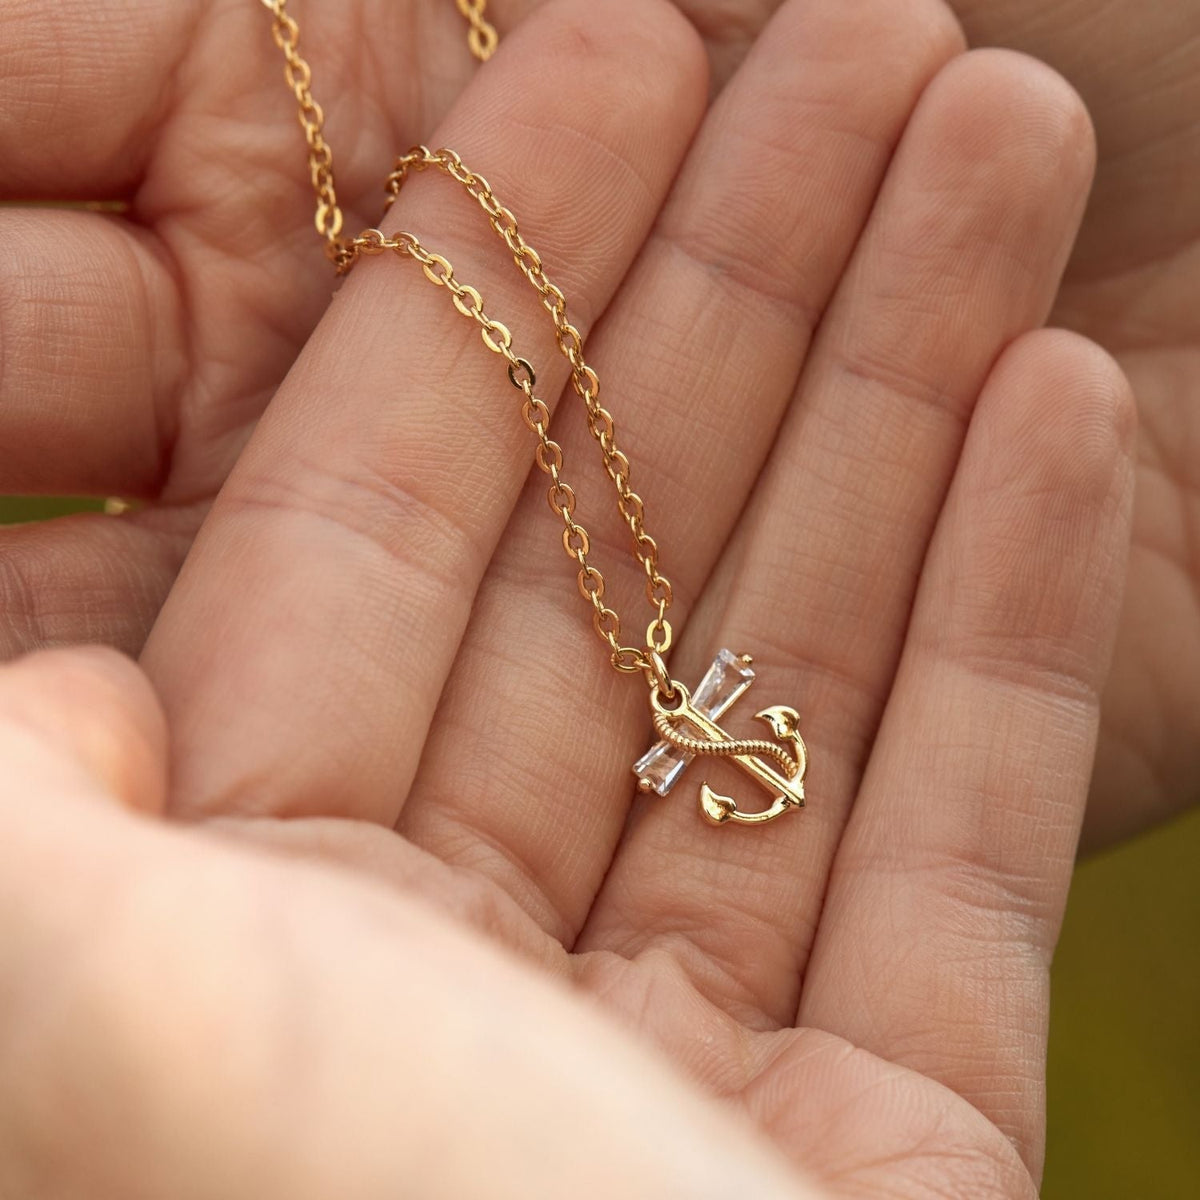 In Memory of Your Amazing Son | Sympathy Gift | Anchor Necklace